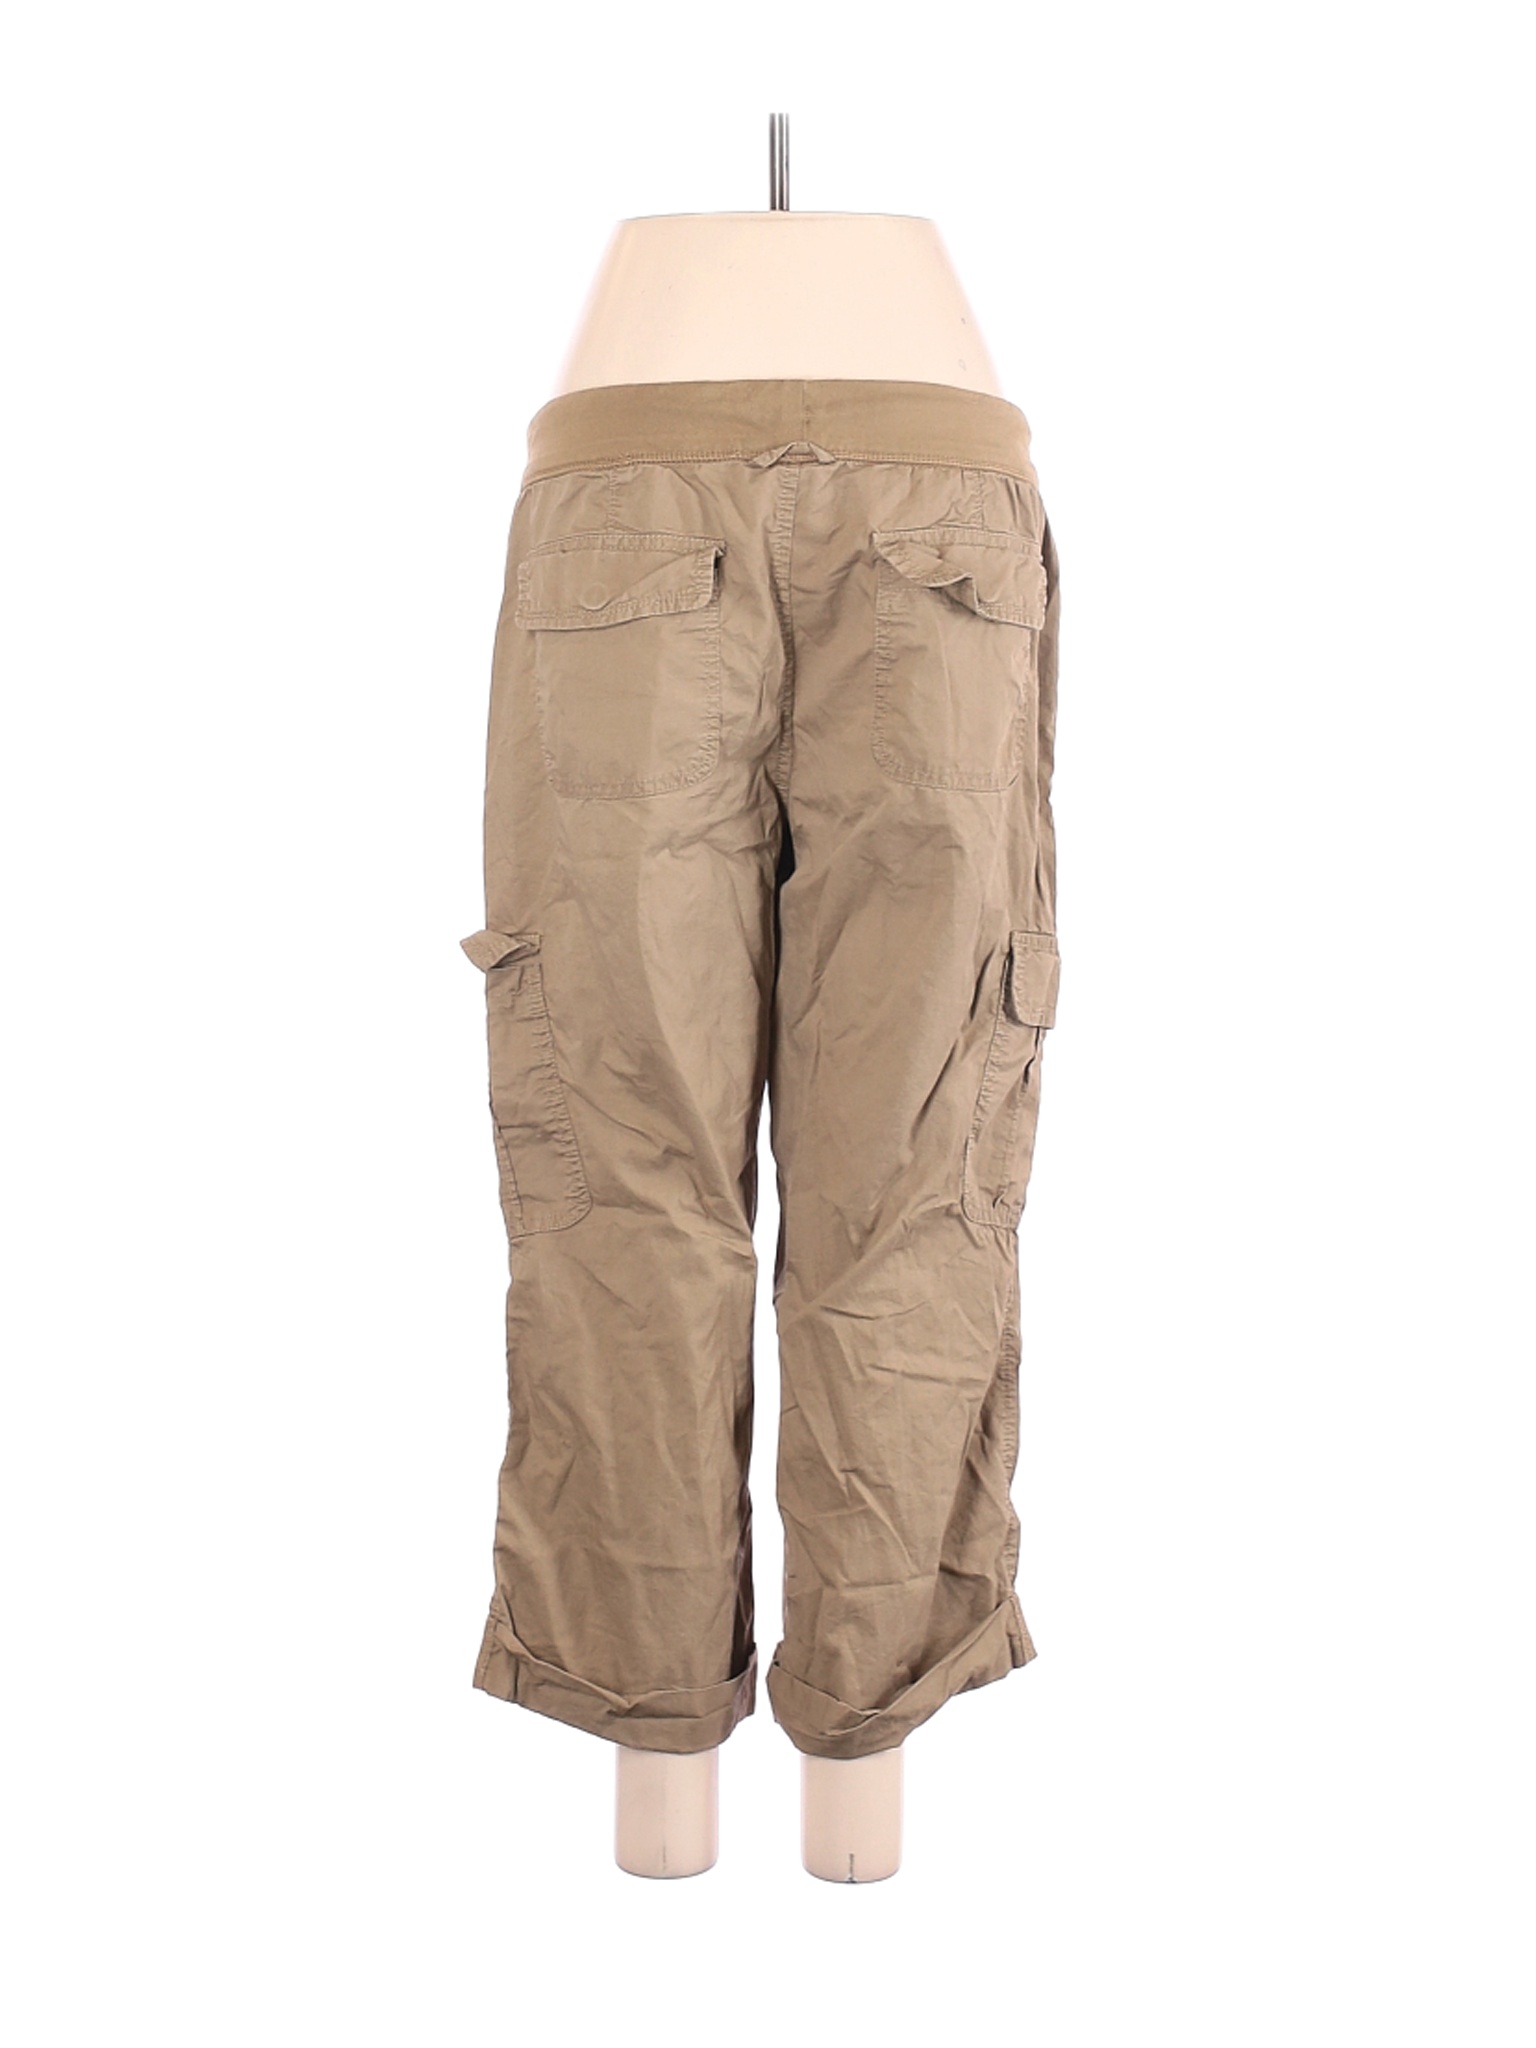 Old Navy Women's Cargo Pants On Sale Up To 90% Off Retail | thredUP